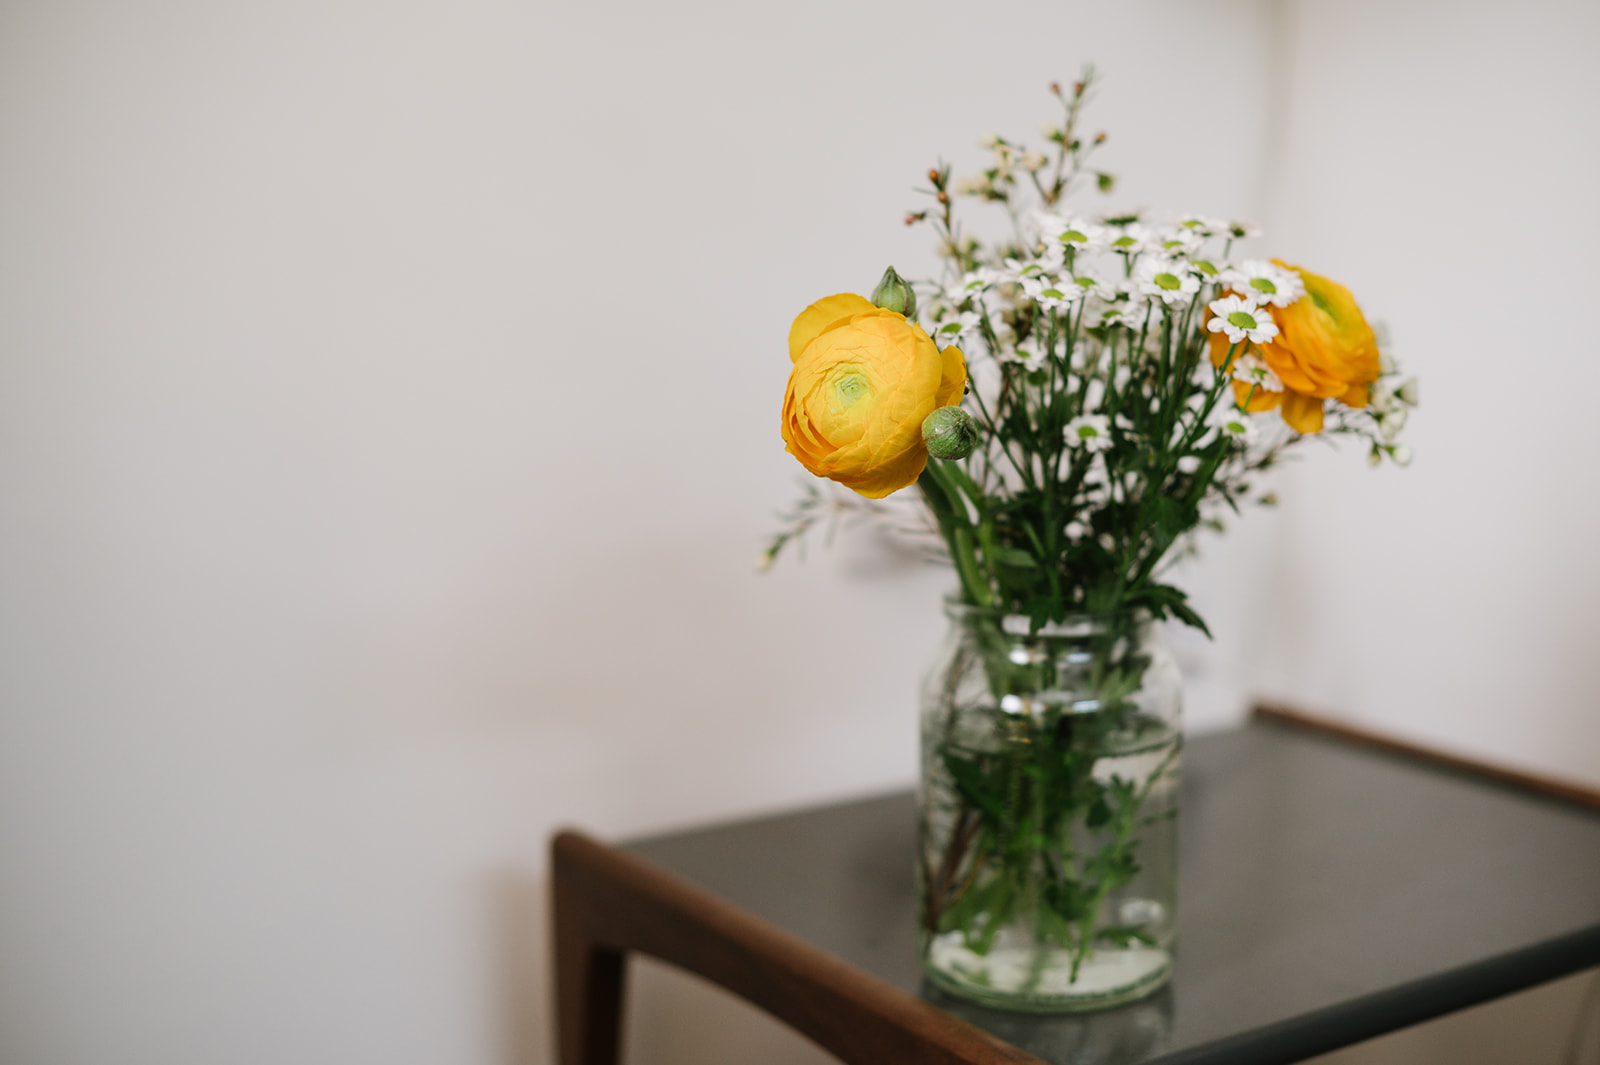 a flower arrangement with yellow and white flowers in a jar